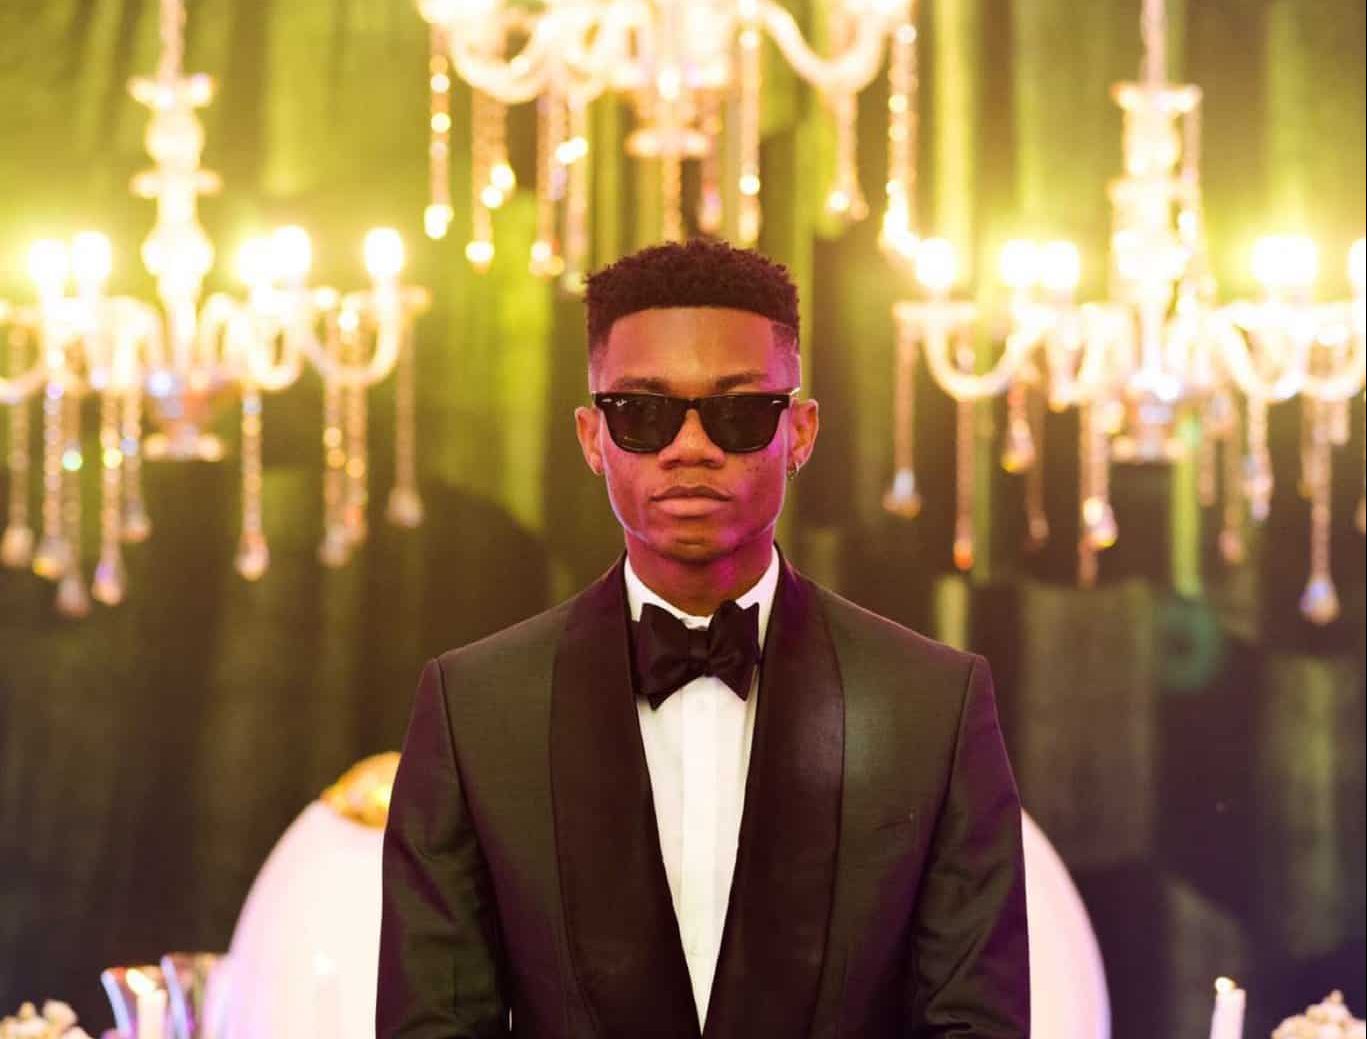 I'm Too Handsome - Kidi Says In Video As He Tags Himself 'Most Handsome Man Alive'